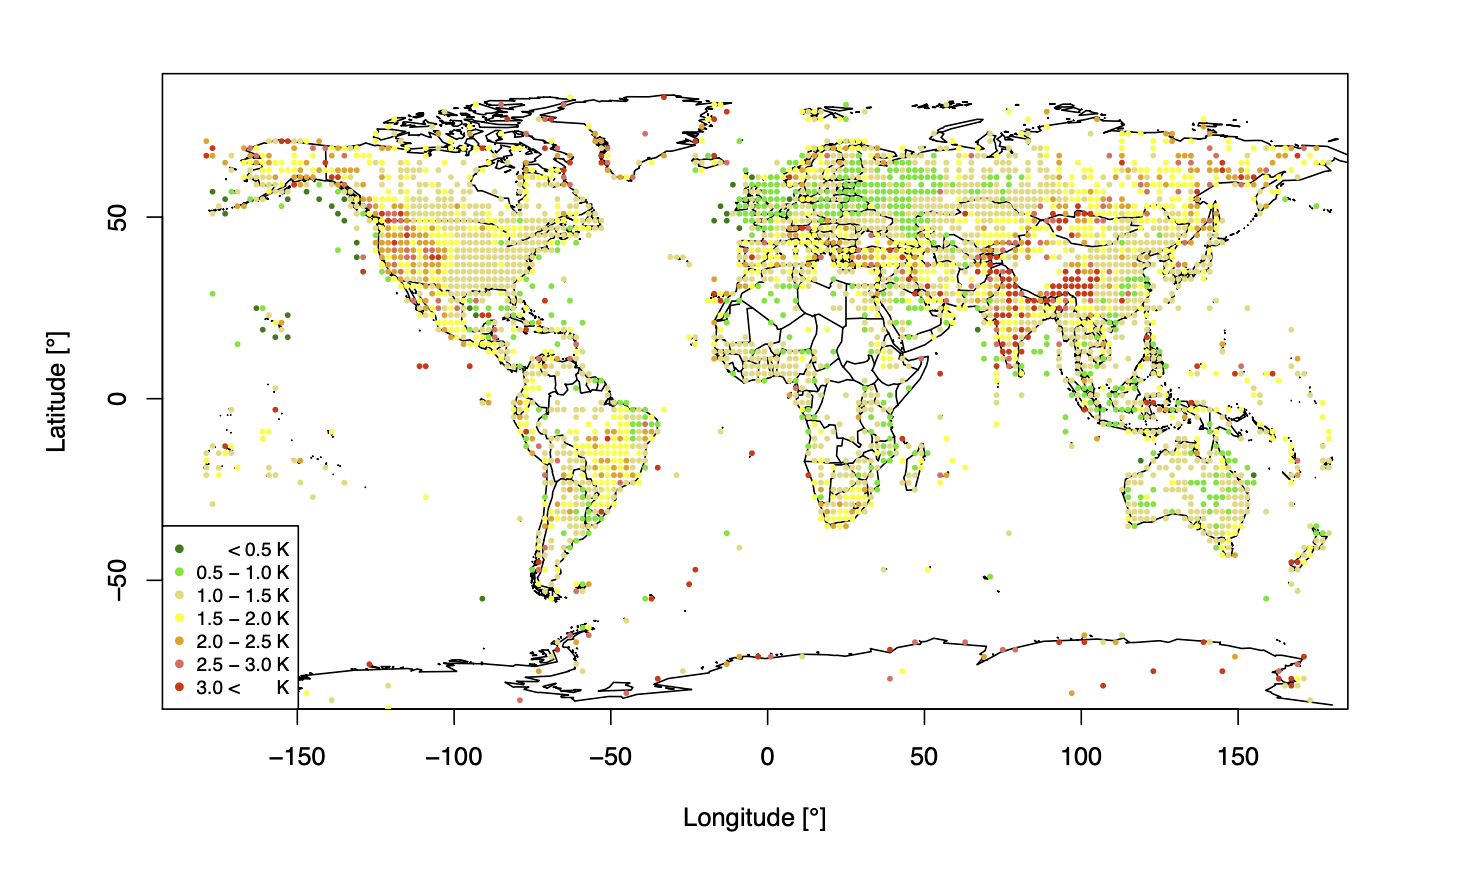 Spatial distribution of the MAE [K] for NEMS (top) and ERA5 (bottom), 
calculated for hourly measurements of the year 2018 of over 8000 weather stations worldwide.